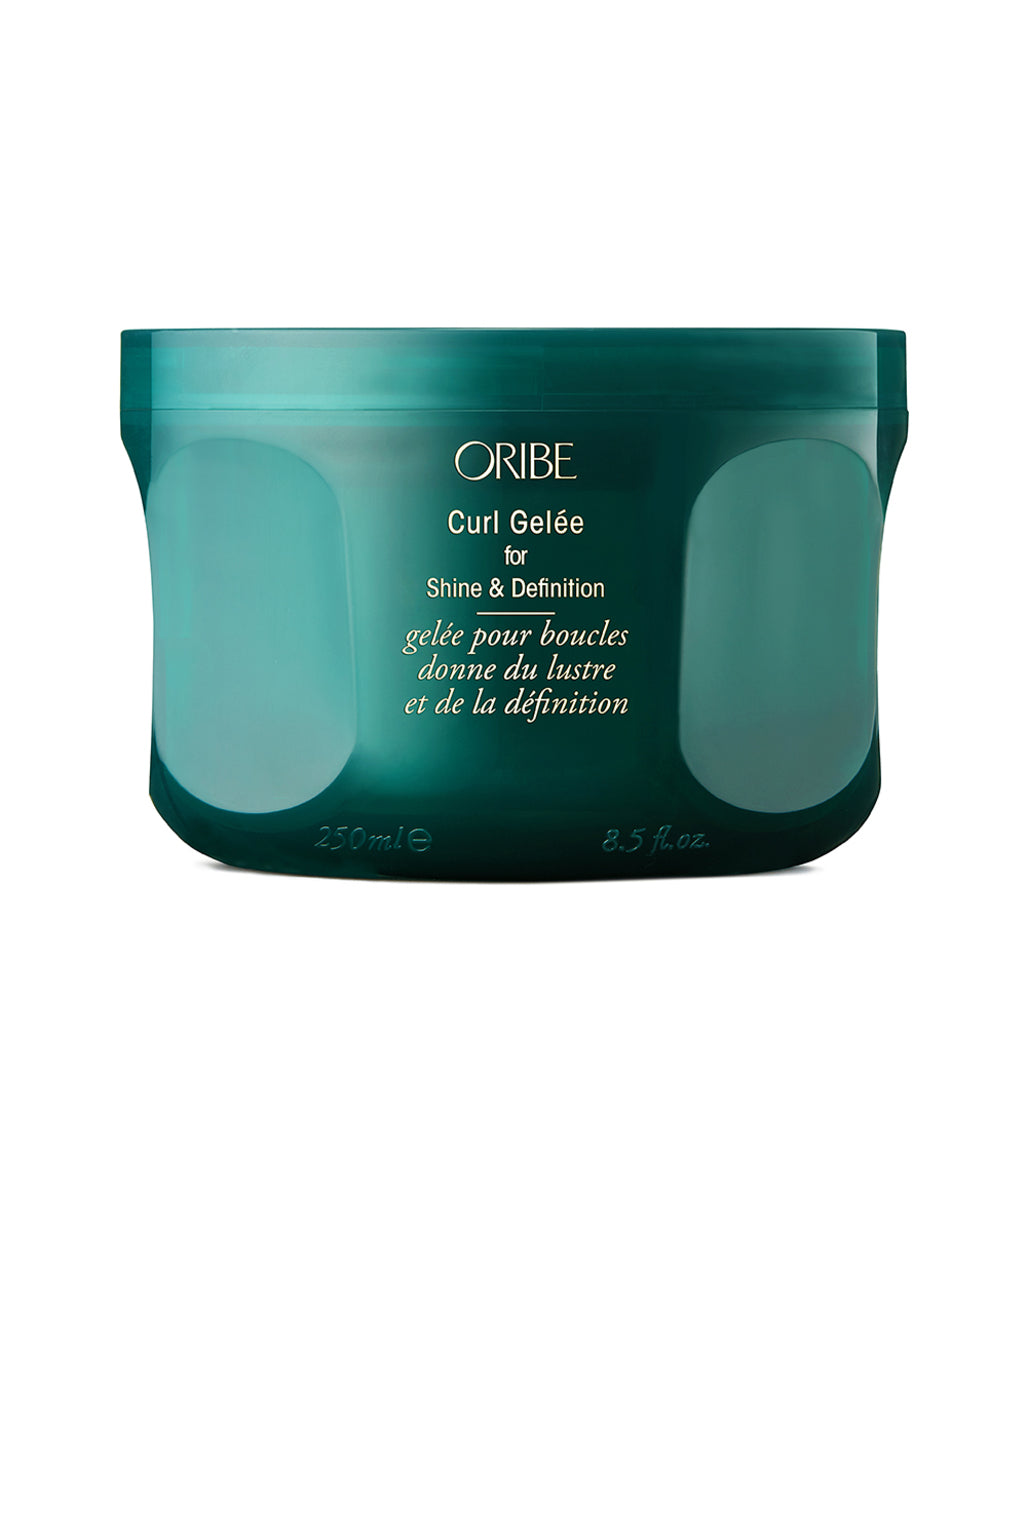 ORIBE CURL GELEE FOR SHINE & DEFINITION